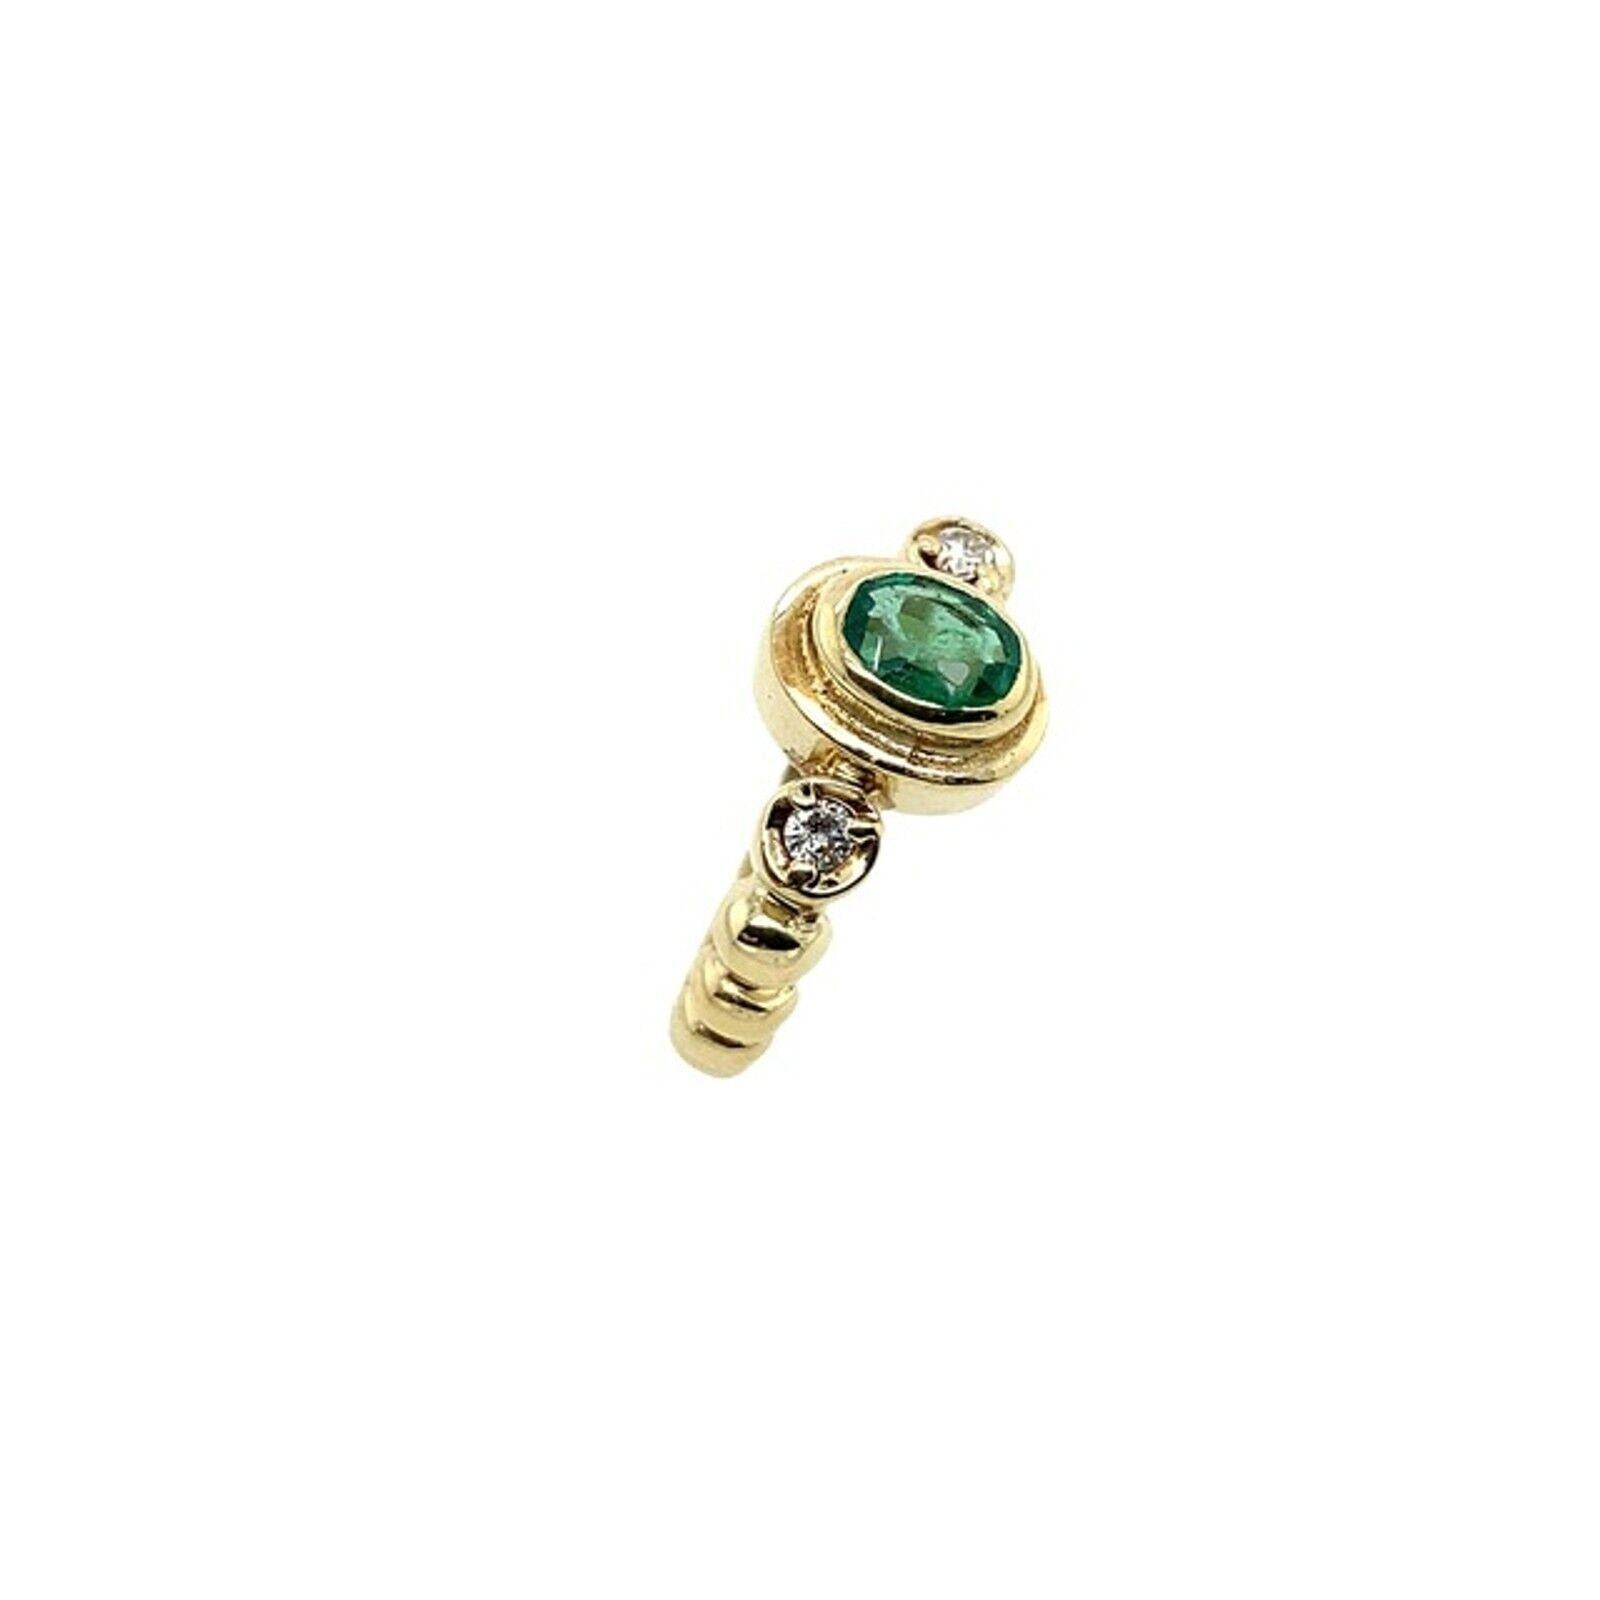 This gorgeous 0.50ct oval emerald ring set in 14ct yellow gold setting with 2 natural round brilliant cut diamonds on shoulders, 0.10ct. This is a unique and eye-catching ring.

Additional Information:
Total Diamond Weight: 0.10ct
Diamond Colour: